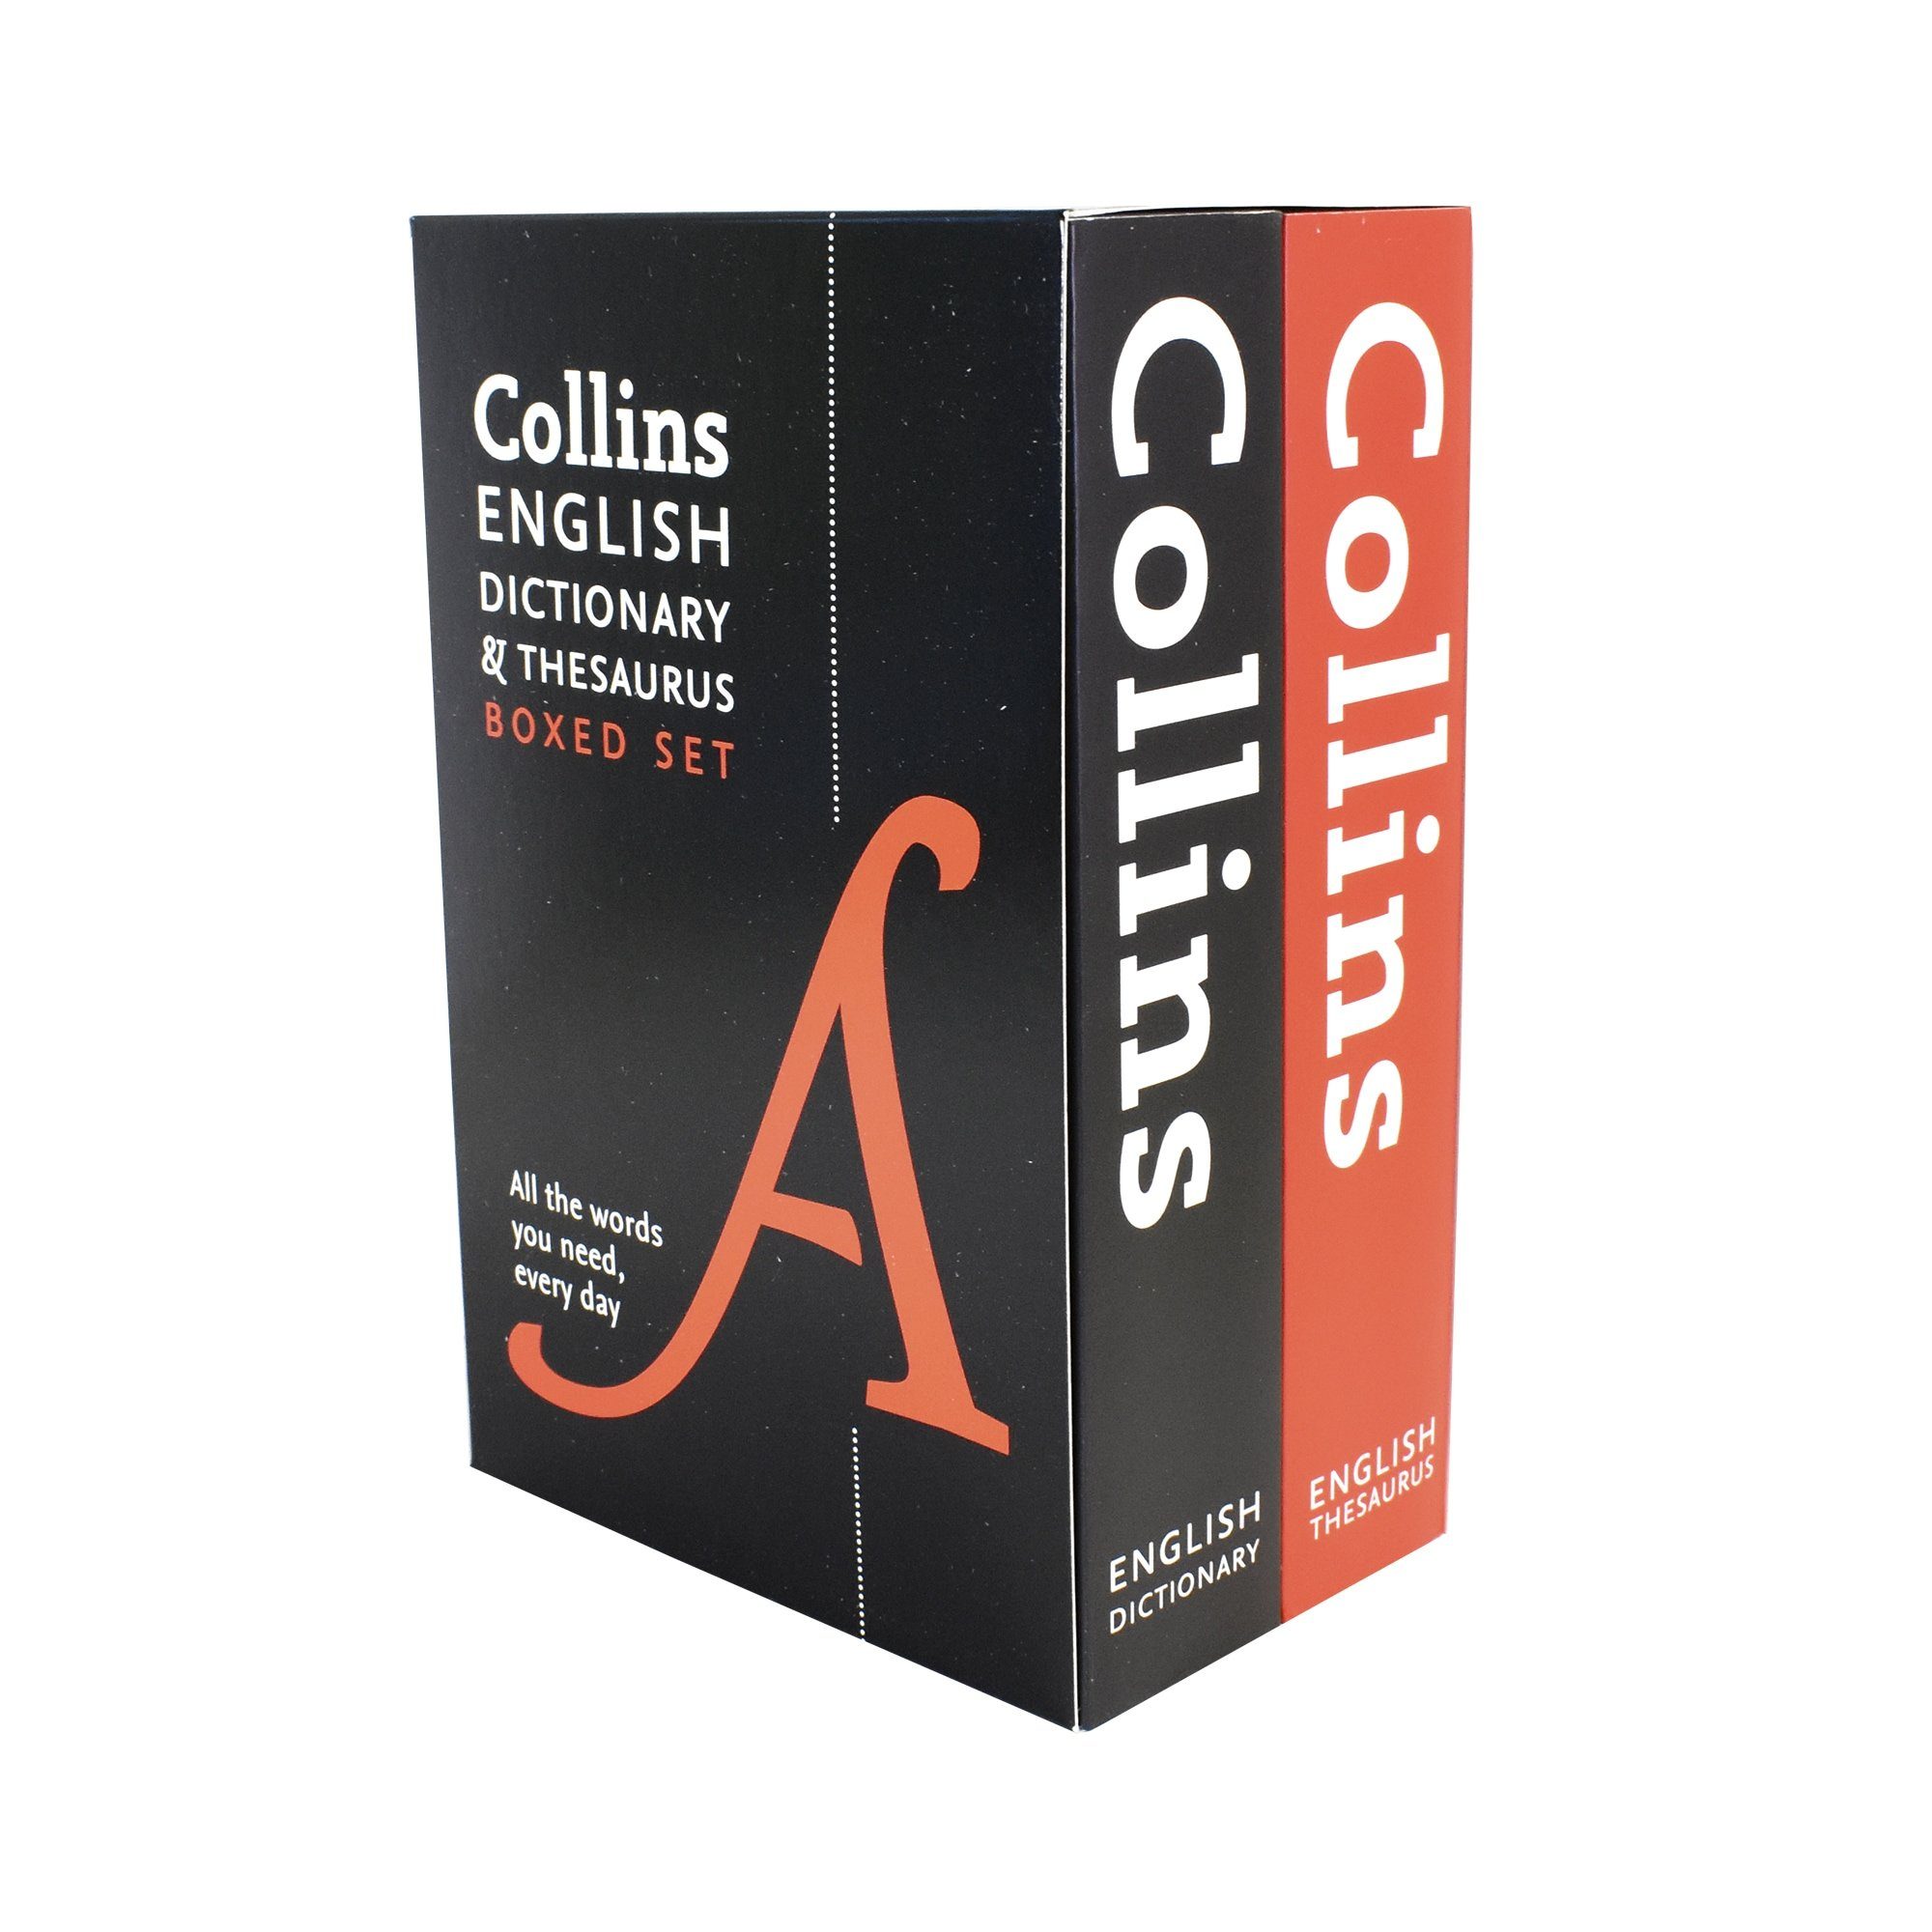 CHEST Synonyms  Collins English Thesaurus (2)